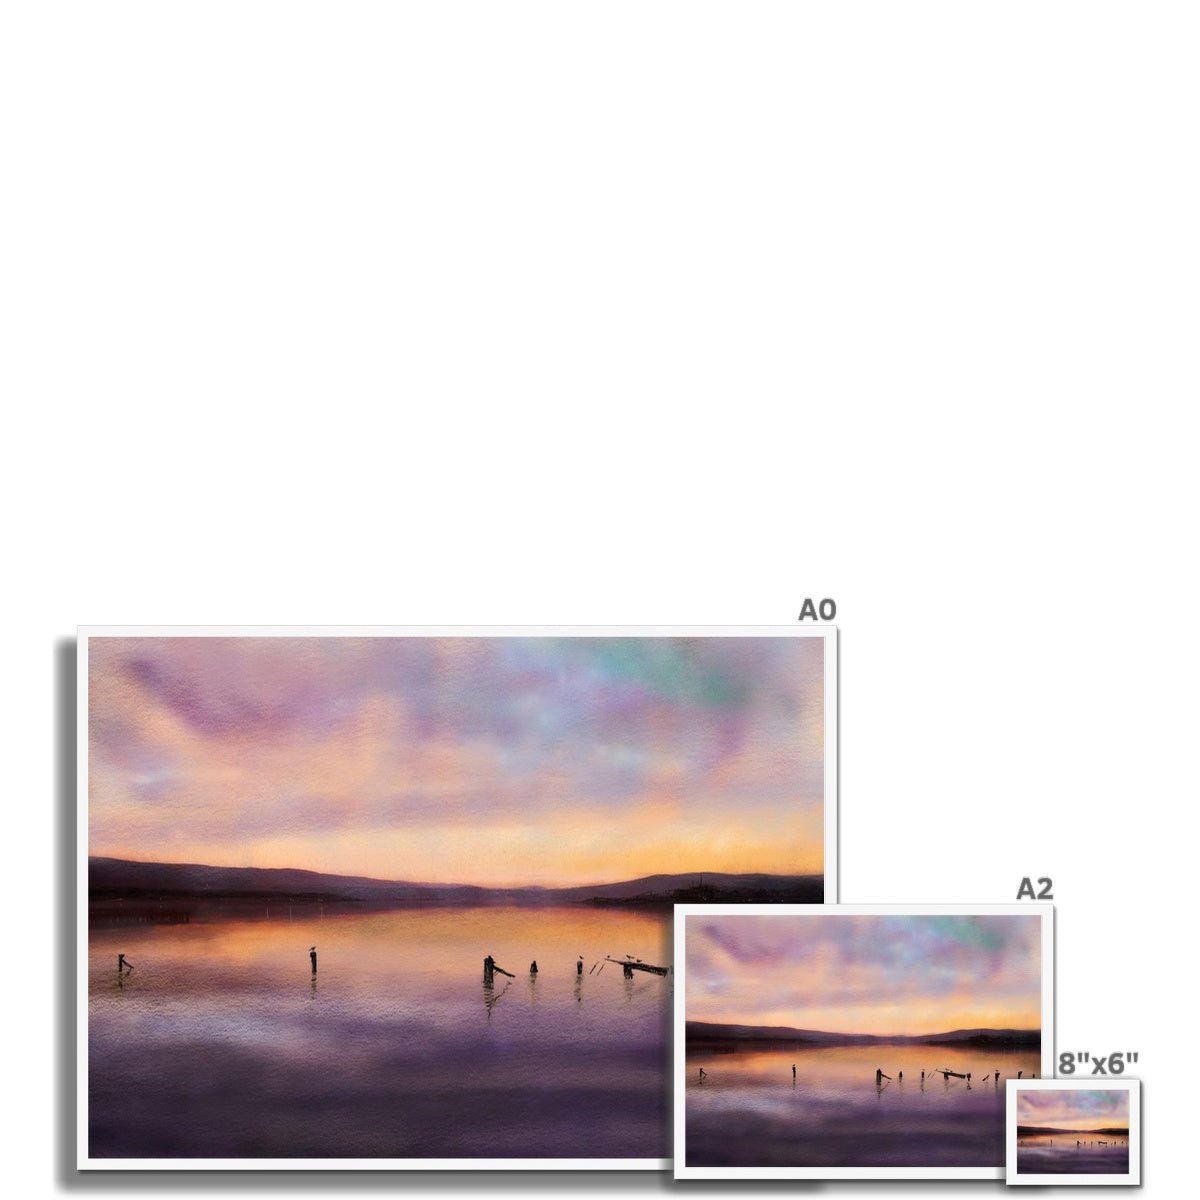 Admiralty Jetty Dusk Painting | Framed Prints From Scotland-Framed Prints-River Clyde Art Gallery-Paintings, Prints, Homeware, Art Gifts From Scotland By Scottish Artist Kevin Hunter